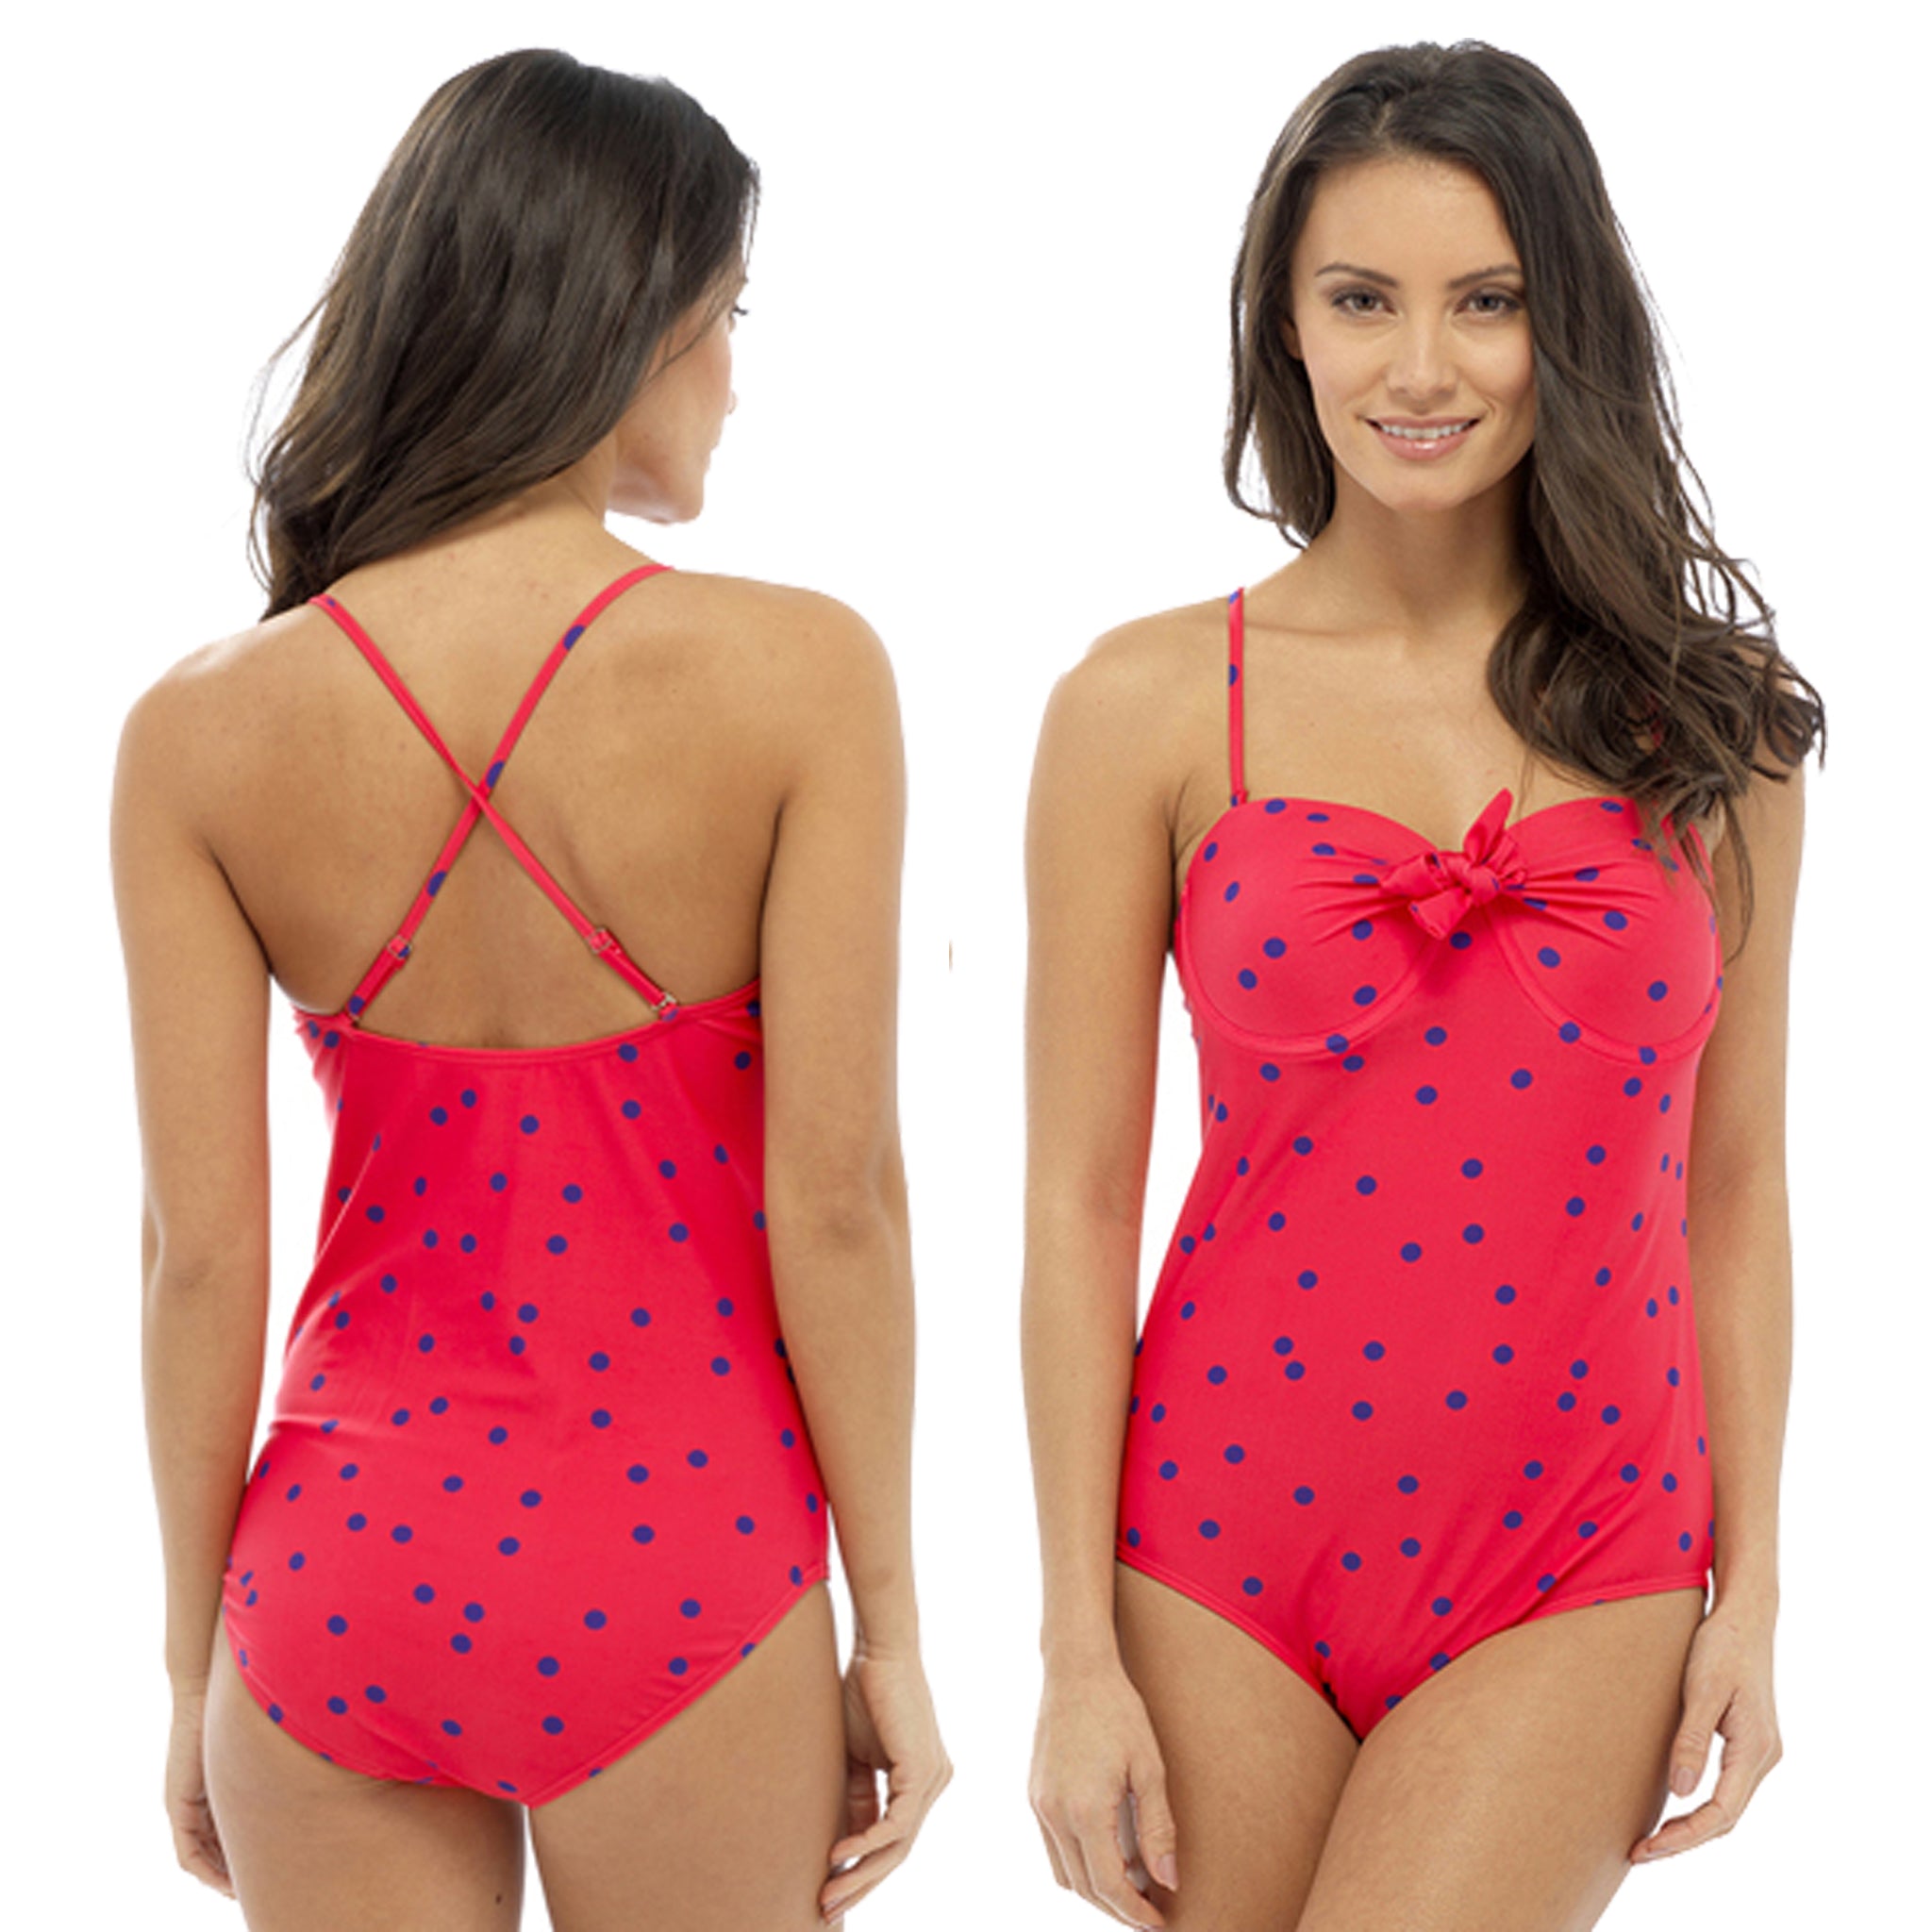 https://justforyouboutique.co.uk/cdn/shop/files/ladies-swimsuit-one-piece-swimming-costume-red-polka-dot-spot-size-12-14-just-for-you-boutique.jpg?v=1686420473